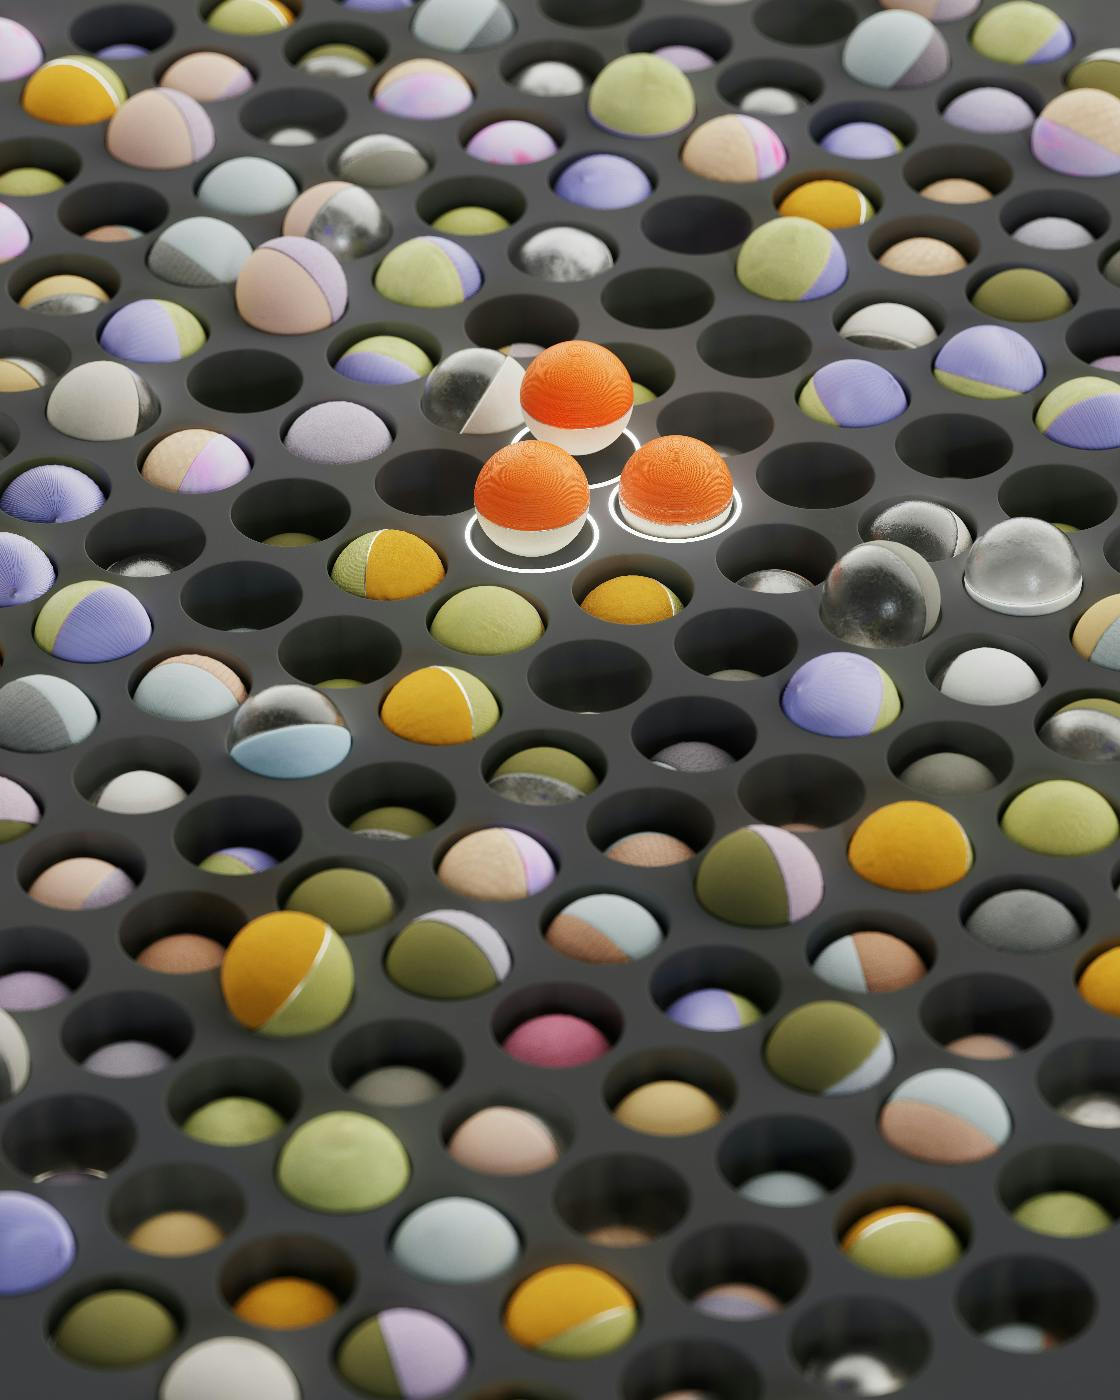 Thousands of two colored balls in small holes